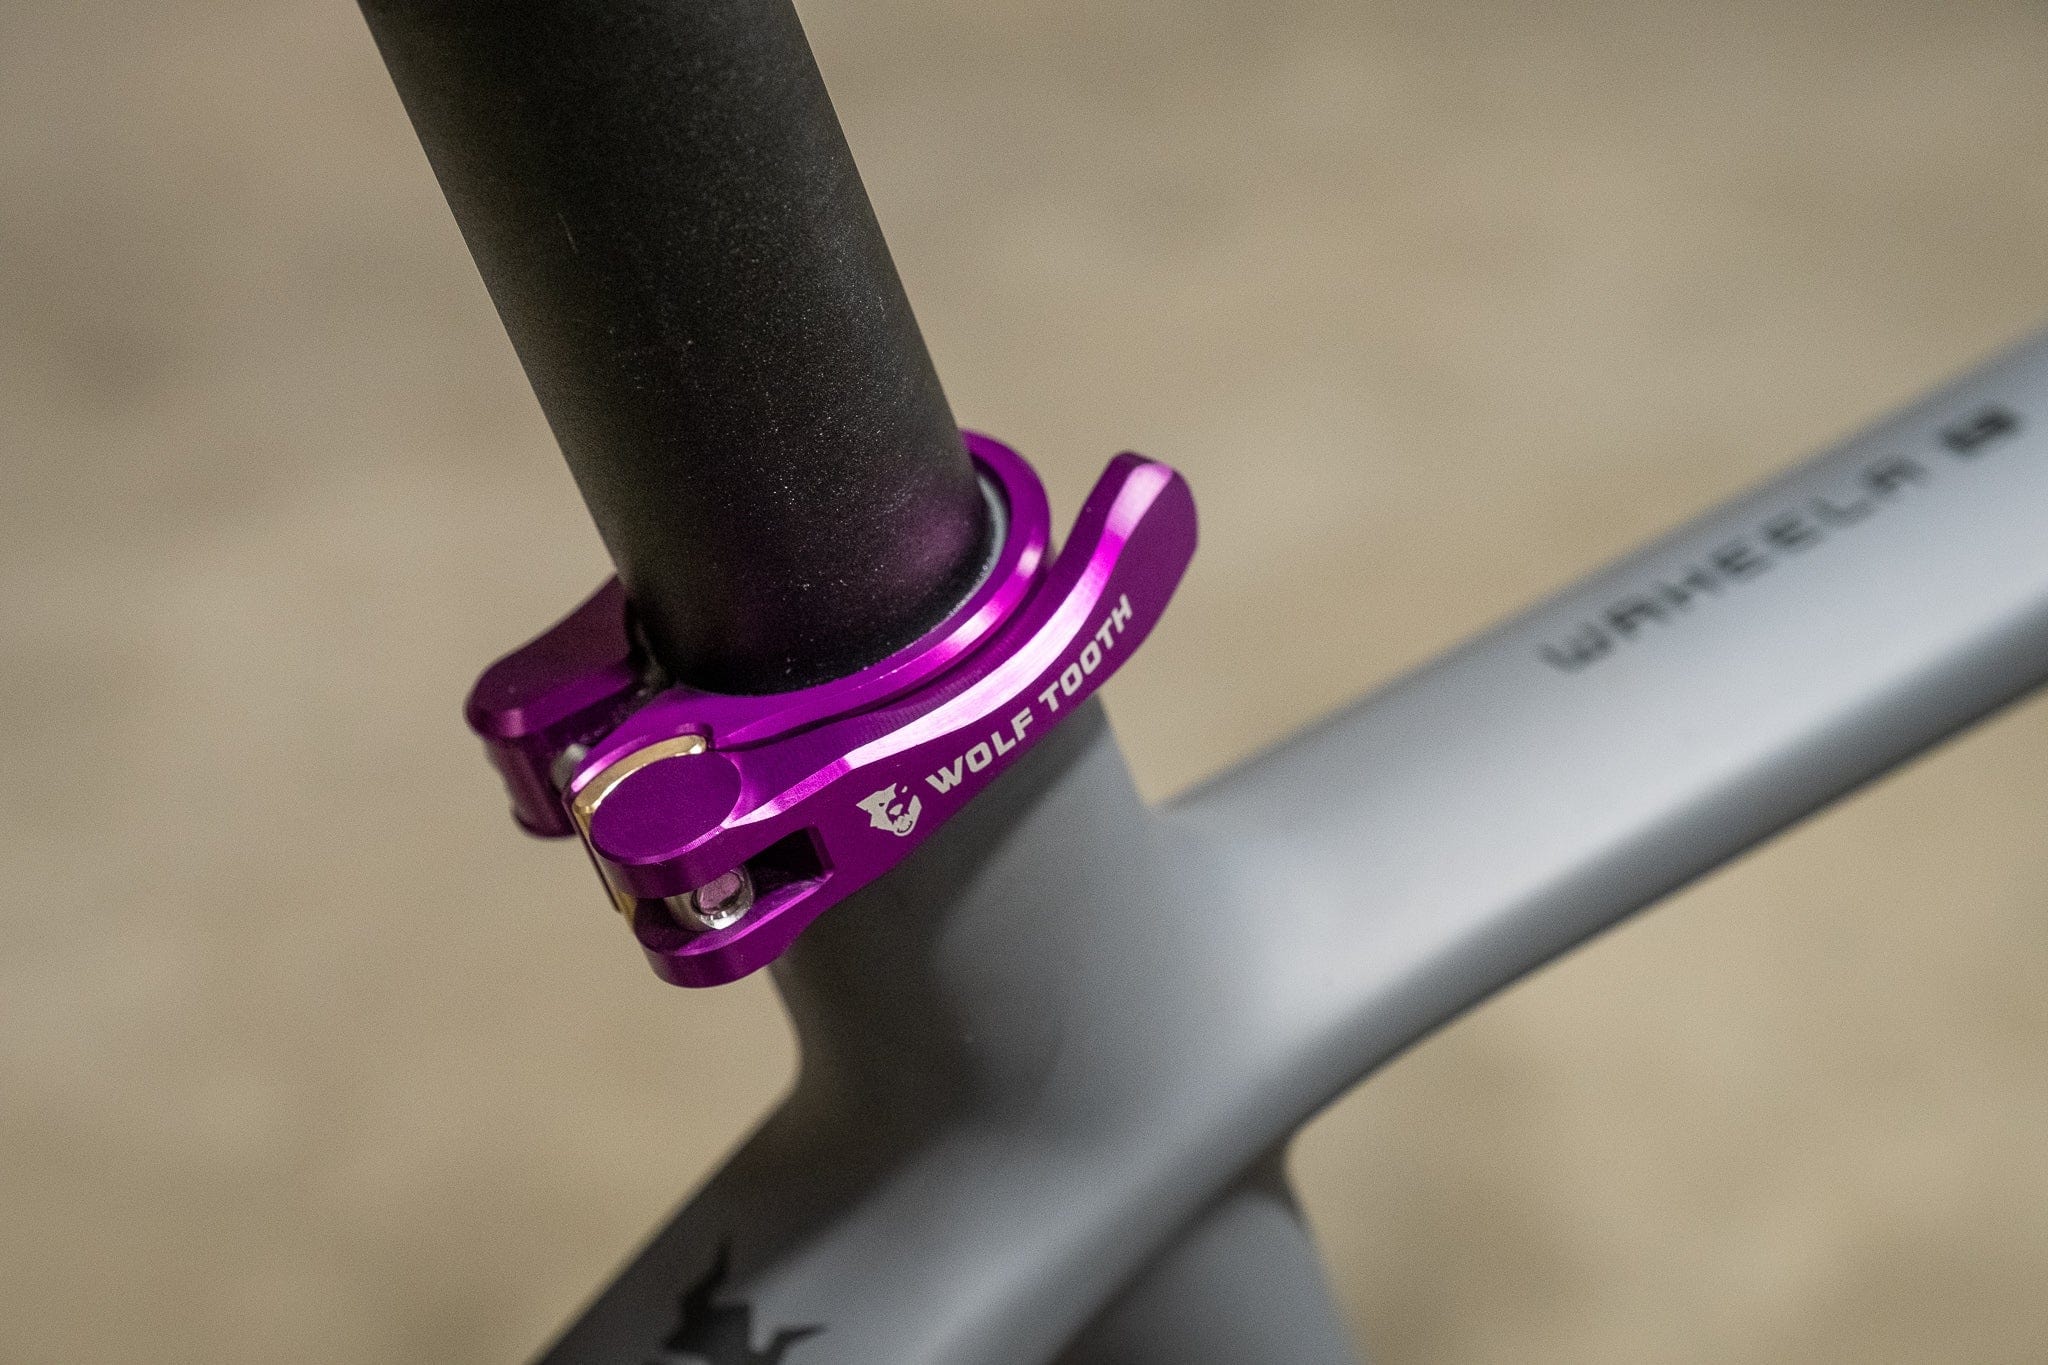 Wolf Tooth Components Quick Release Seatpost Clamp - 29.8mm Purple